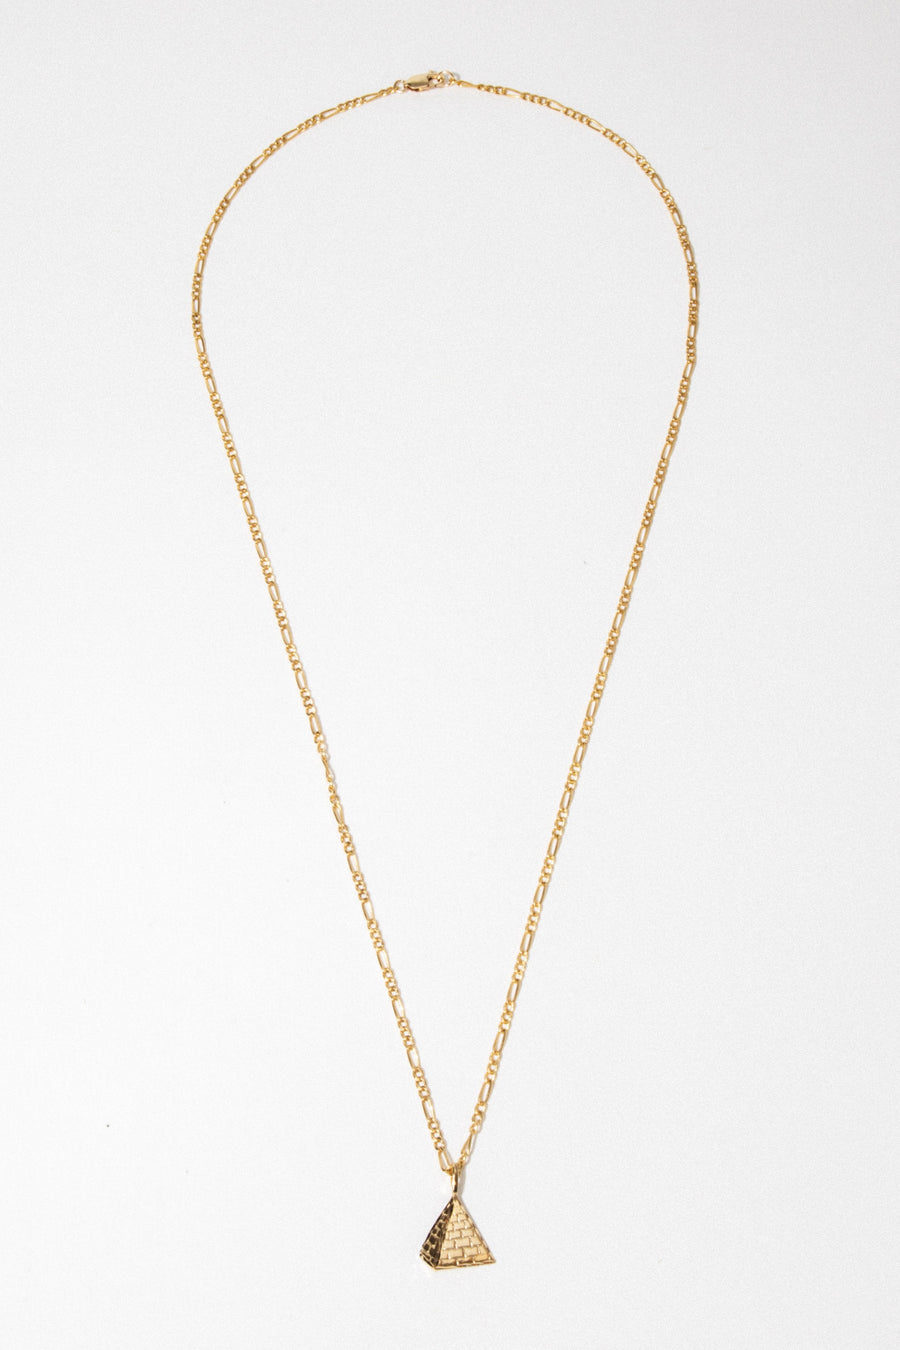 CGM Jewelry Gold / 24 Inches Unisex Pyramid Necklace